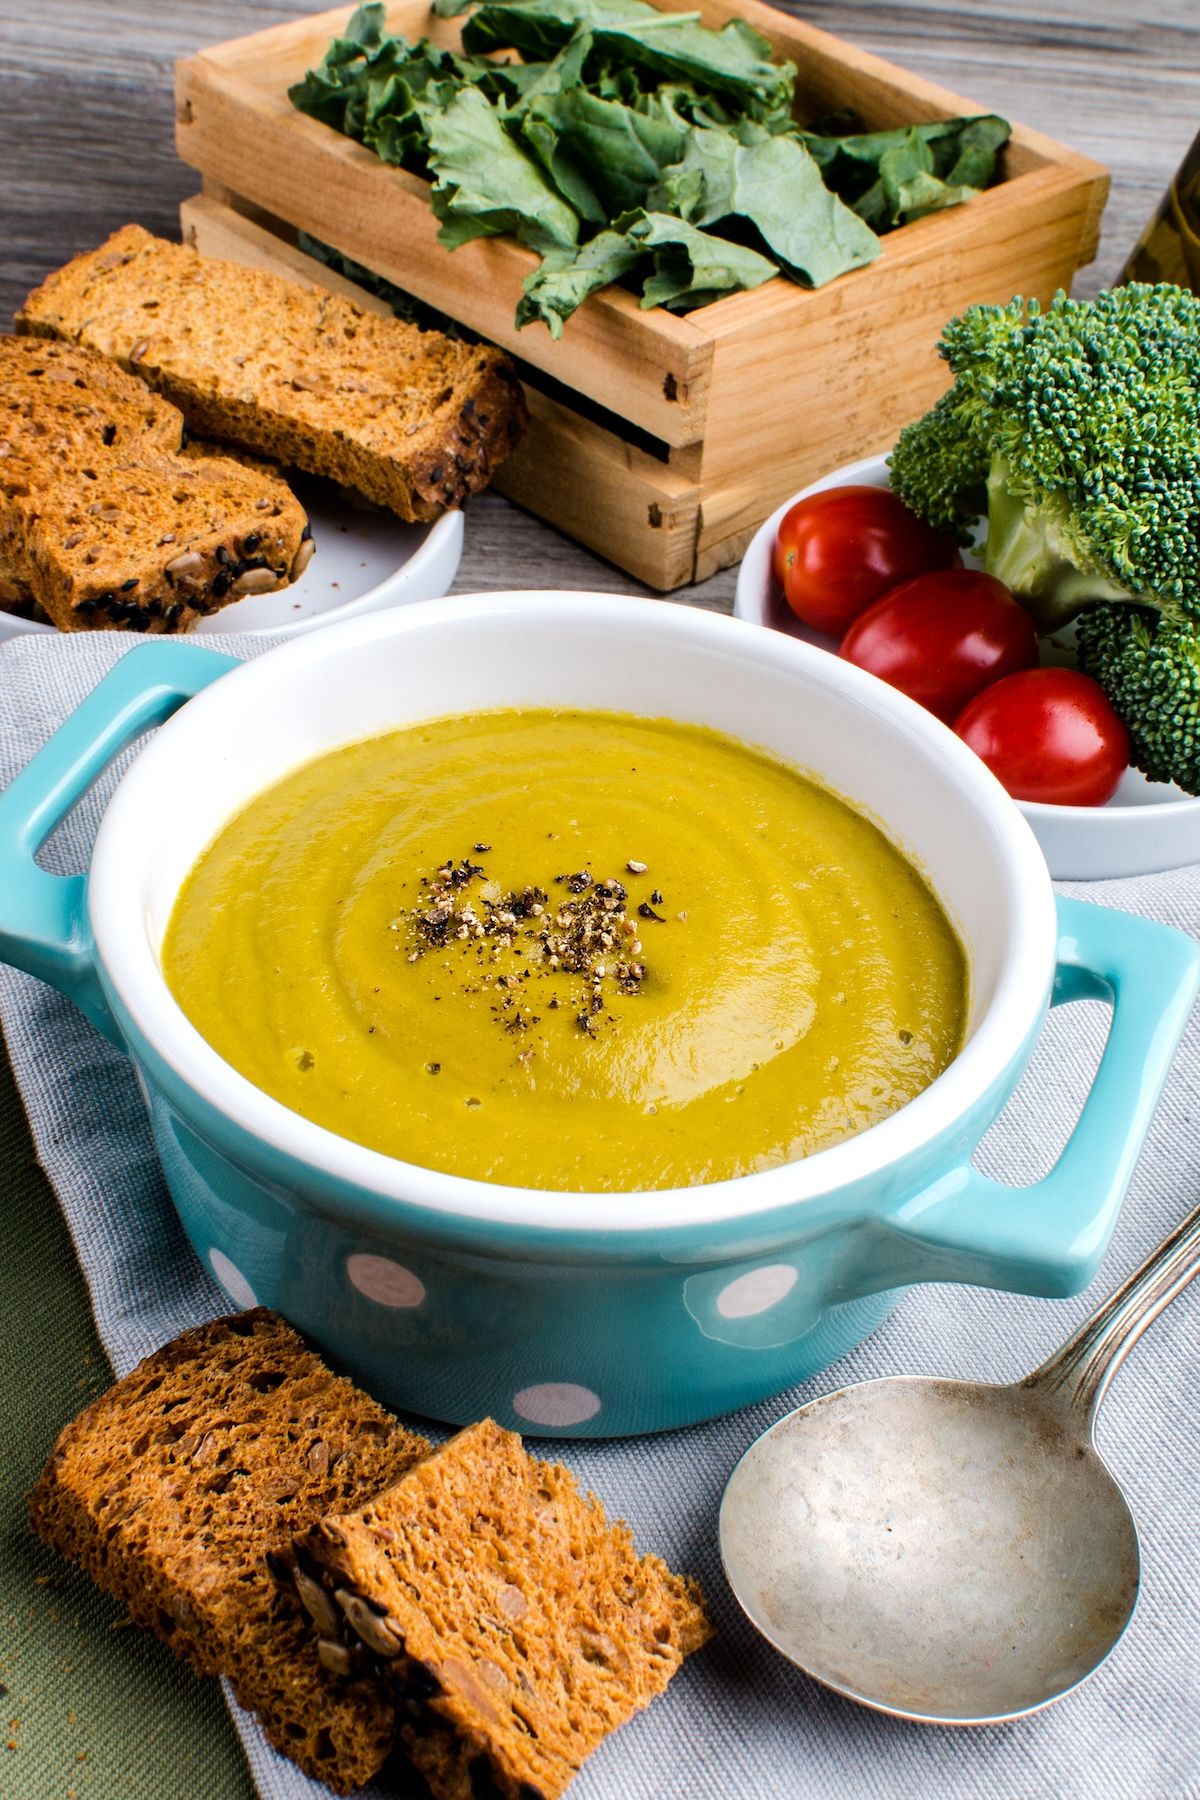 bowl of plant-based broccoli soup on table with toasted bread.